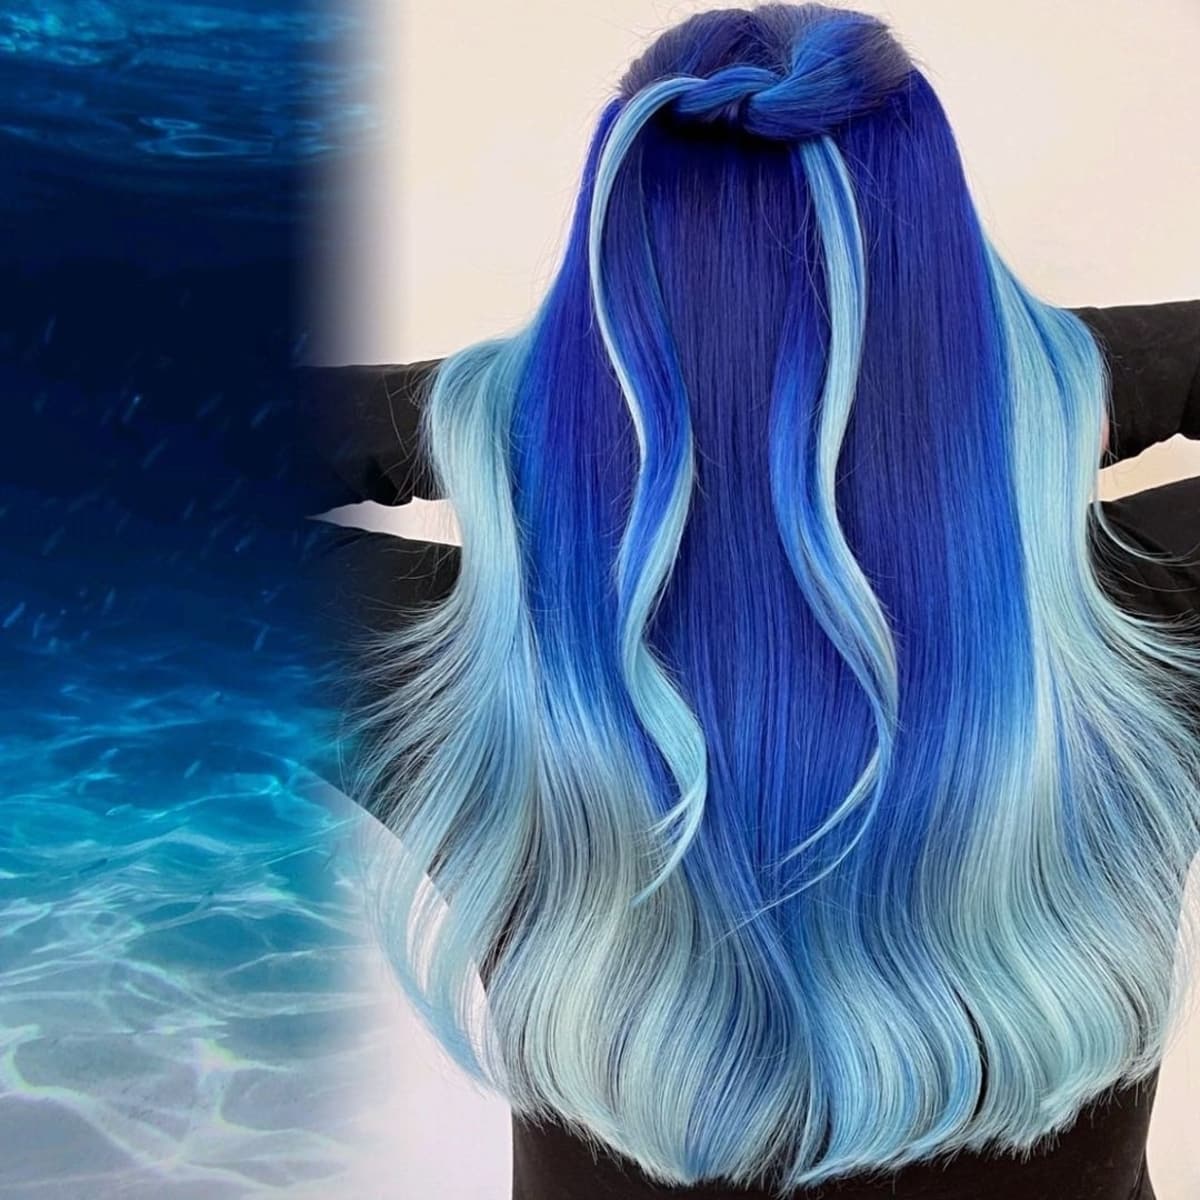 Melted turquoise blue hair